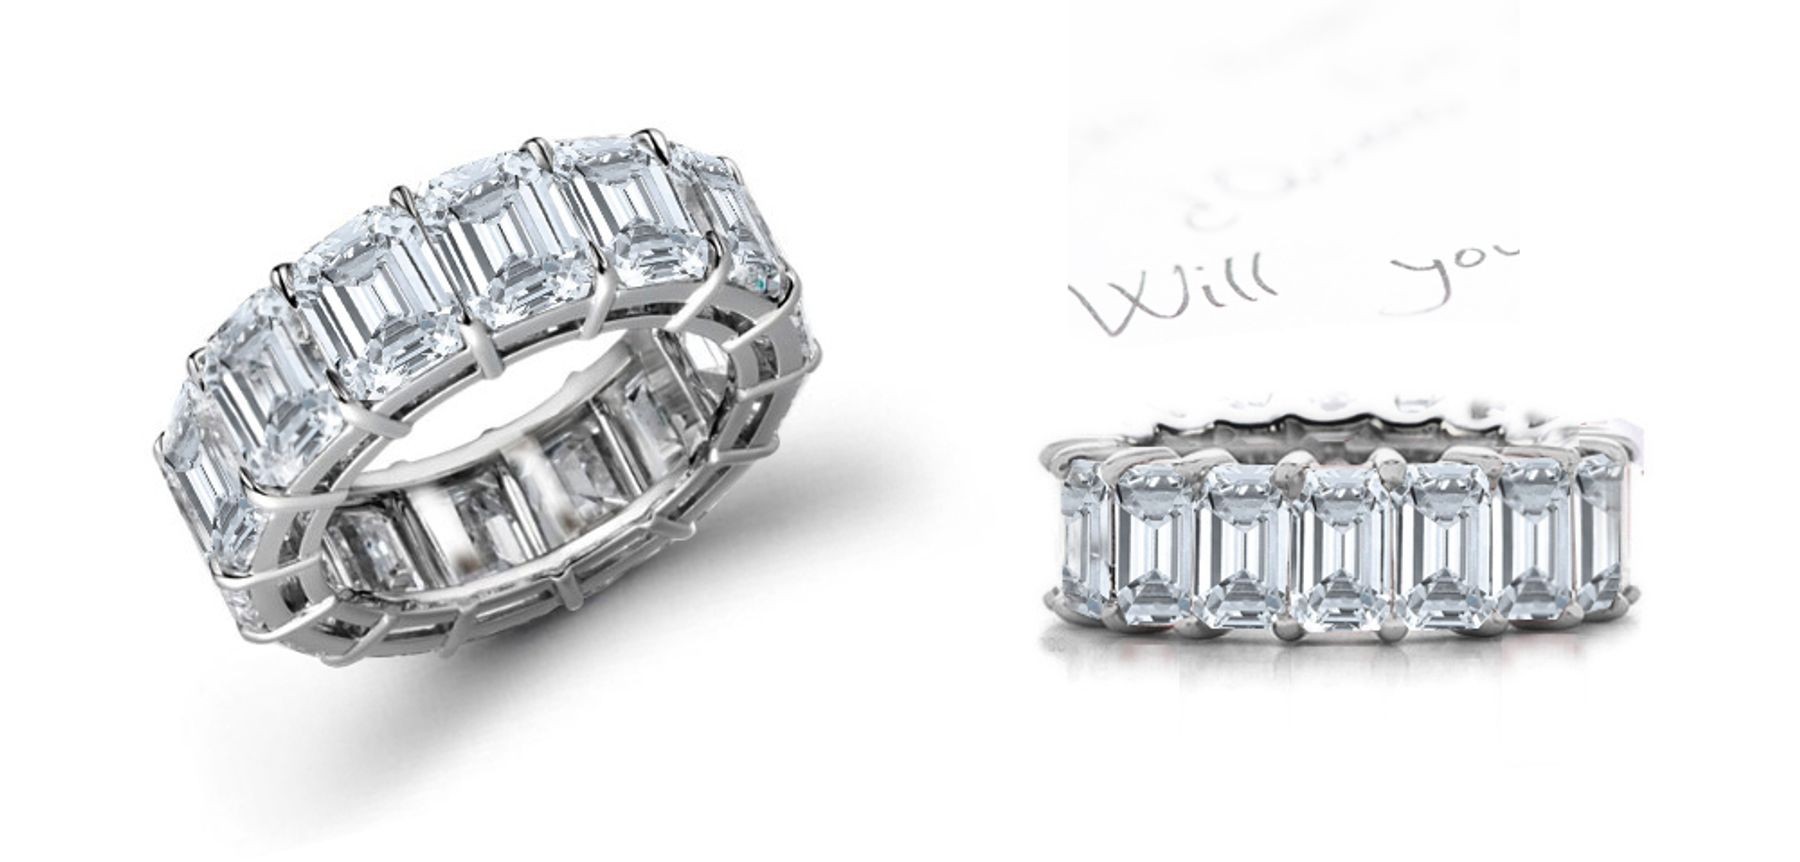 Favorite & Staple: 3.50 Carats of High-Quality Emerald Cut Diamonds Set Shared Prong in a Tailored Design